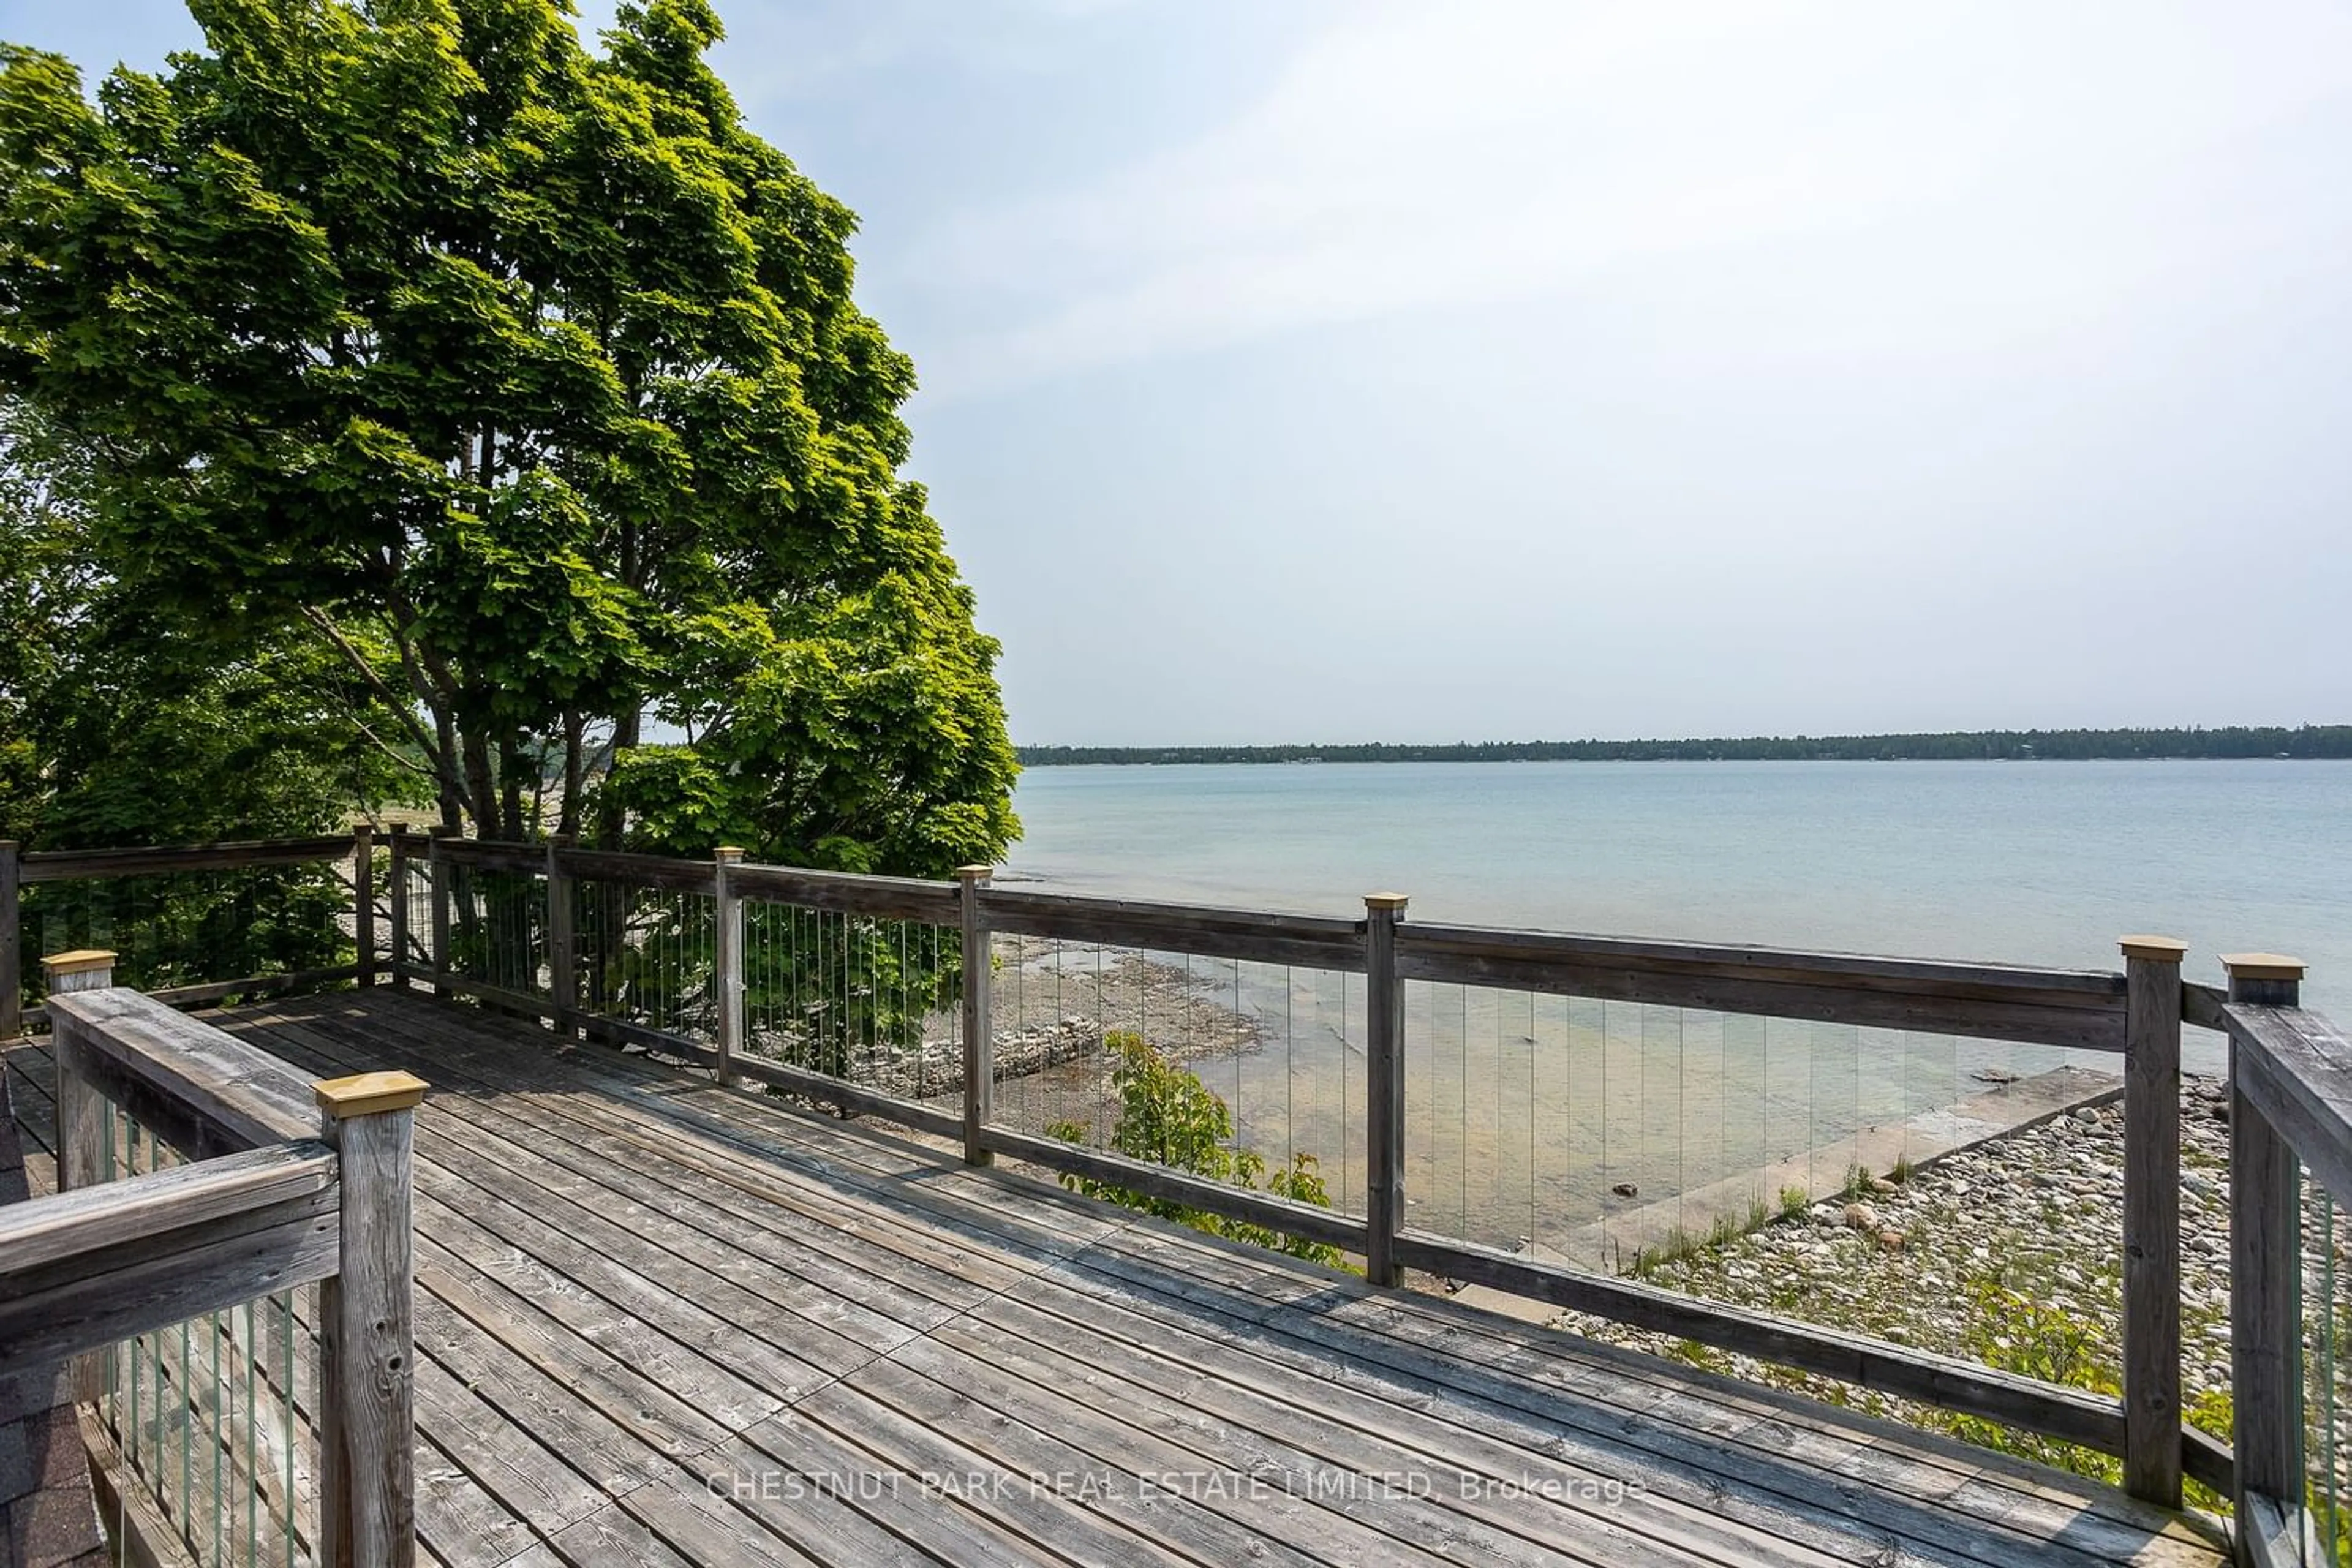 Lakeview for 584 Warner Bay Rd, Northern Bruce Peninsula Ontario N0H 2R0